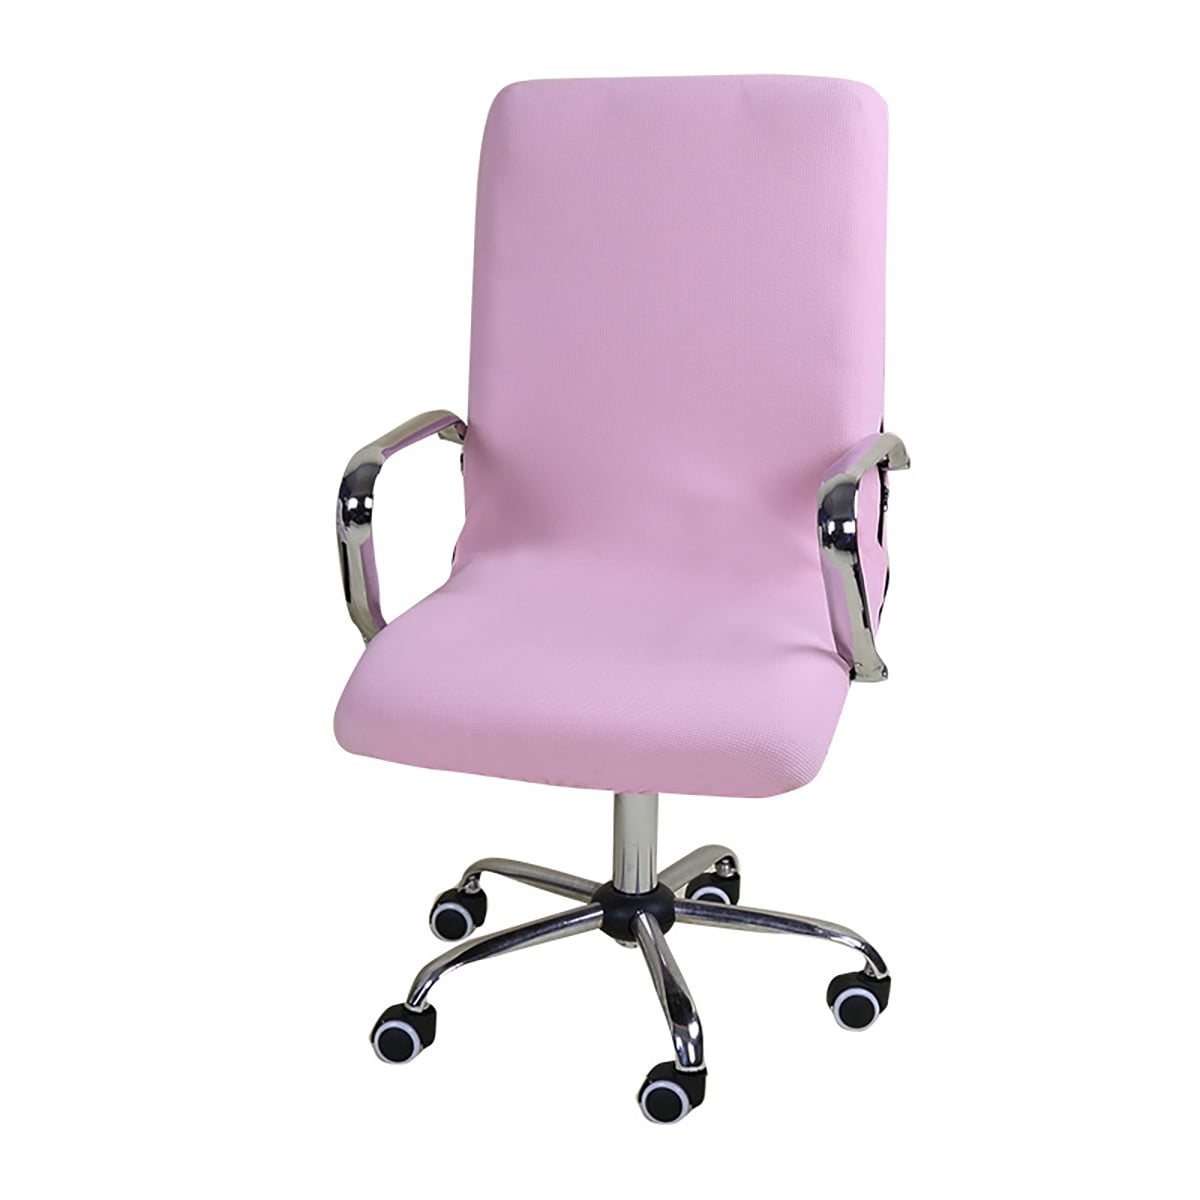 Universal Stretchable Antimacassar Chair Cover Home Office Study Chair Pink 